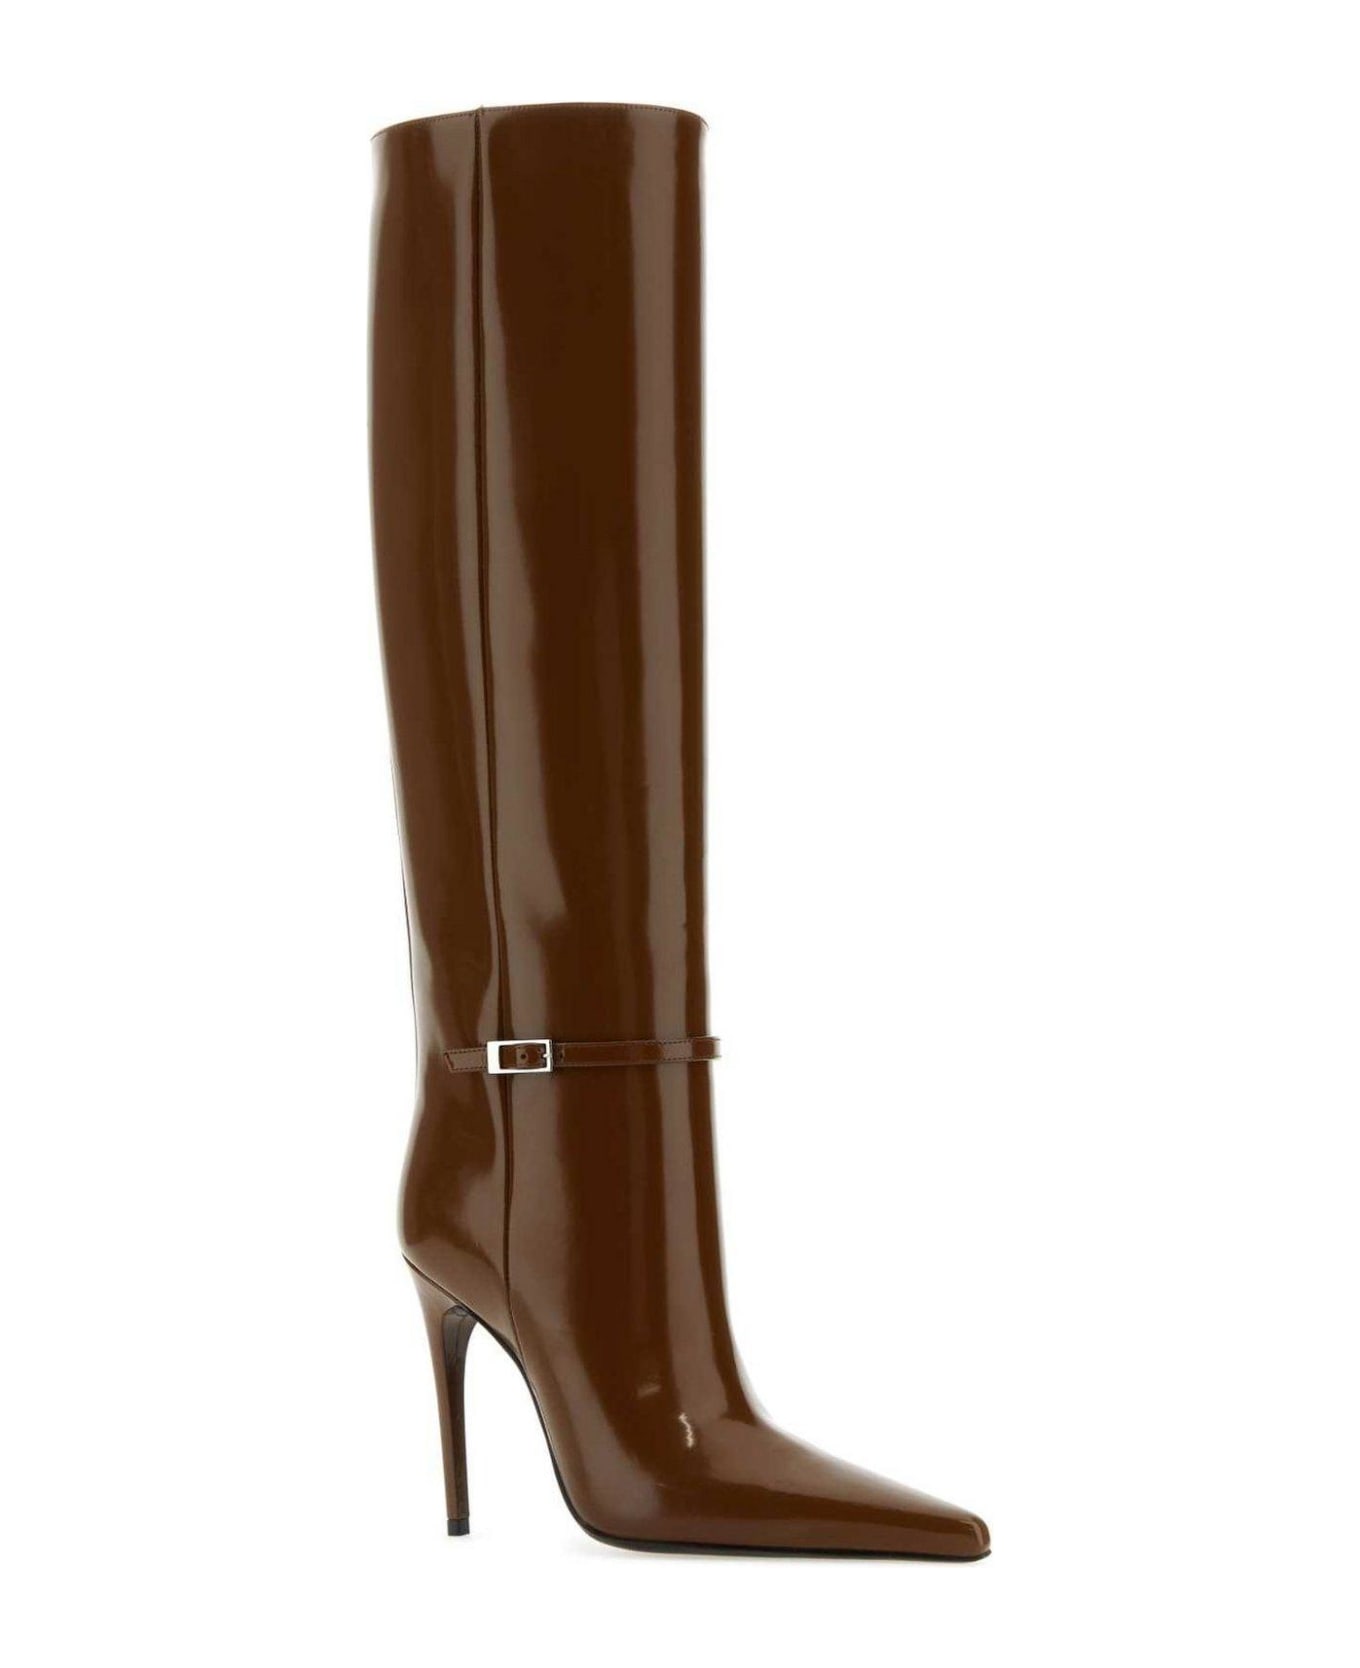 Saint Laurent Vendome Pointed Toe Boots - Brown ブーツ